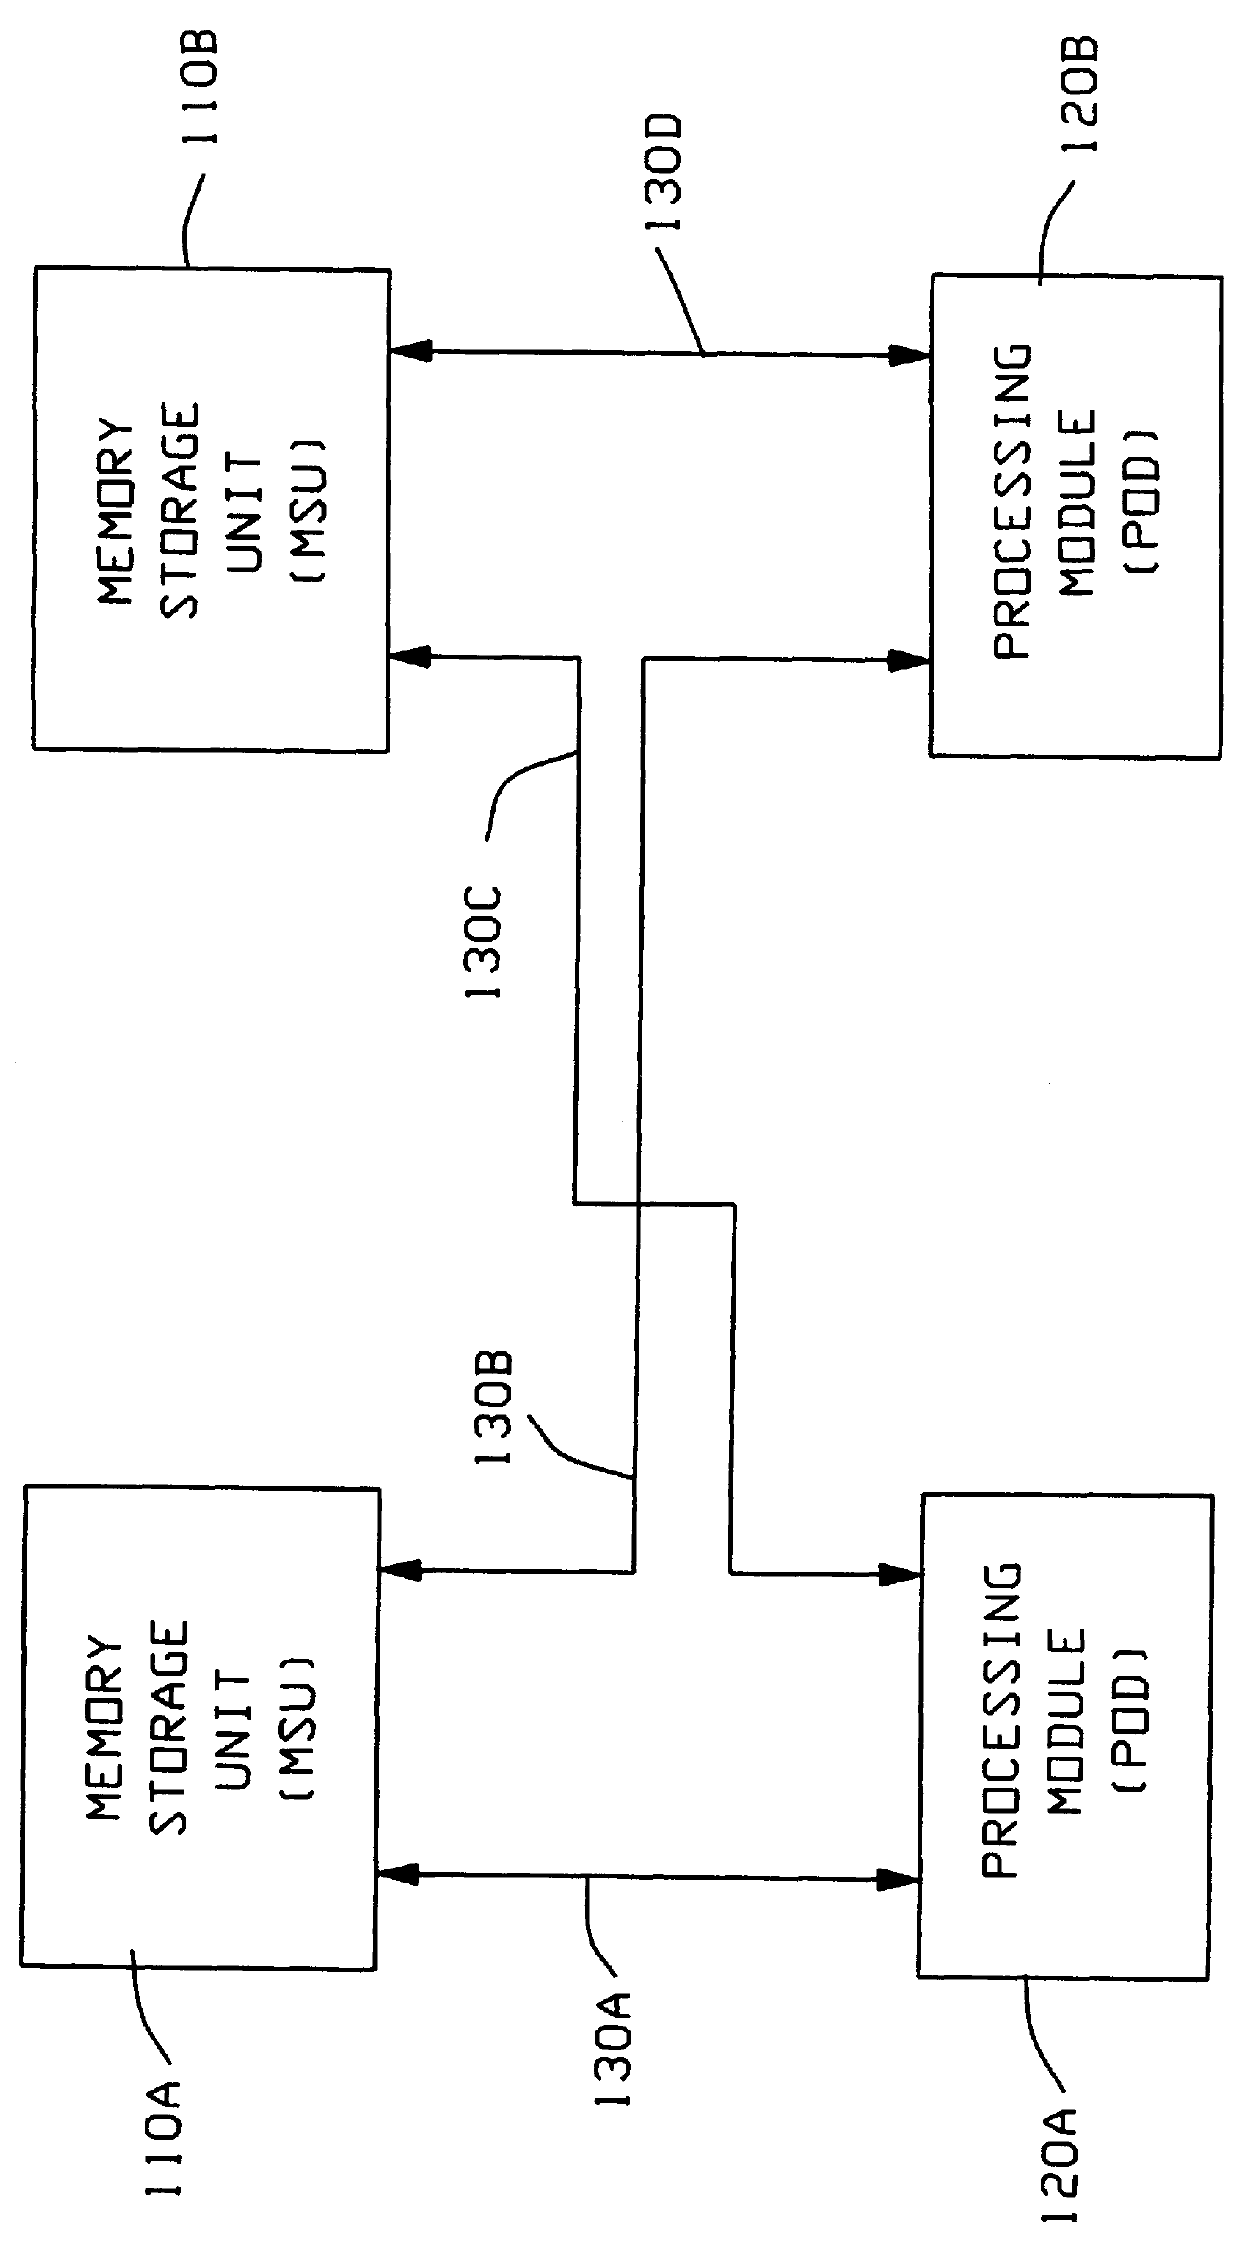 Computer system including plural caches and utilizing access history or patterns to determine data ownership for efficient handling of software locks